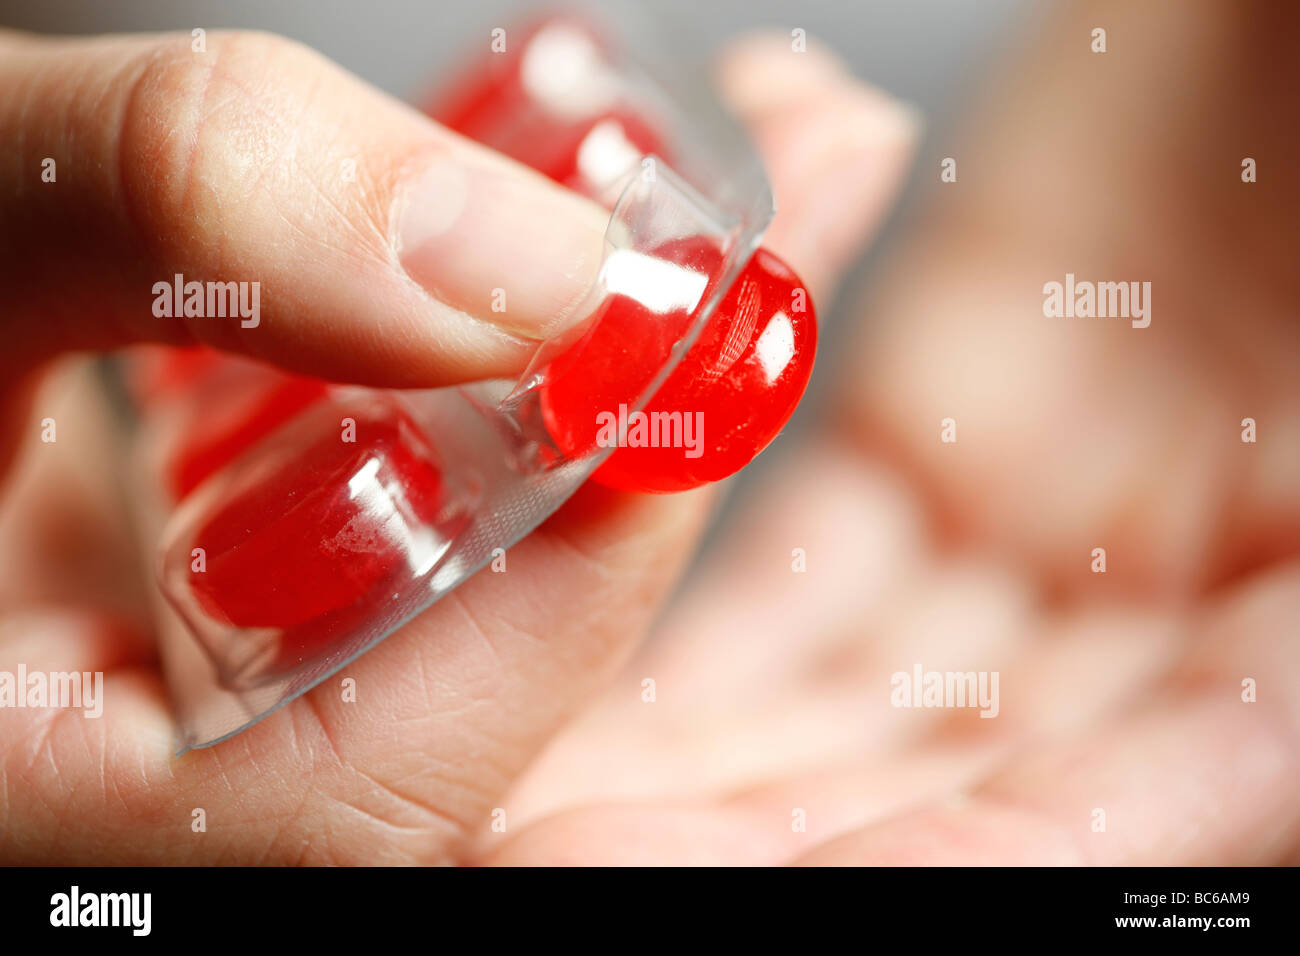 Pill capsule medicament chewable tablet Stock Photo